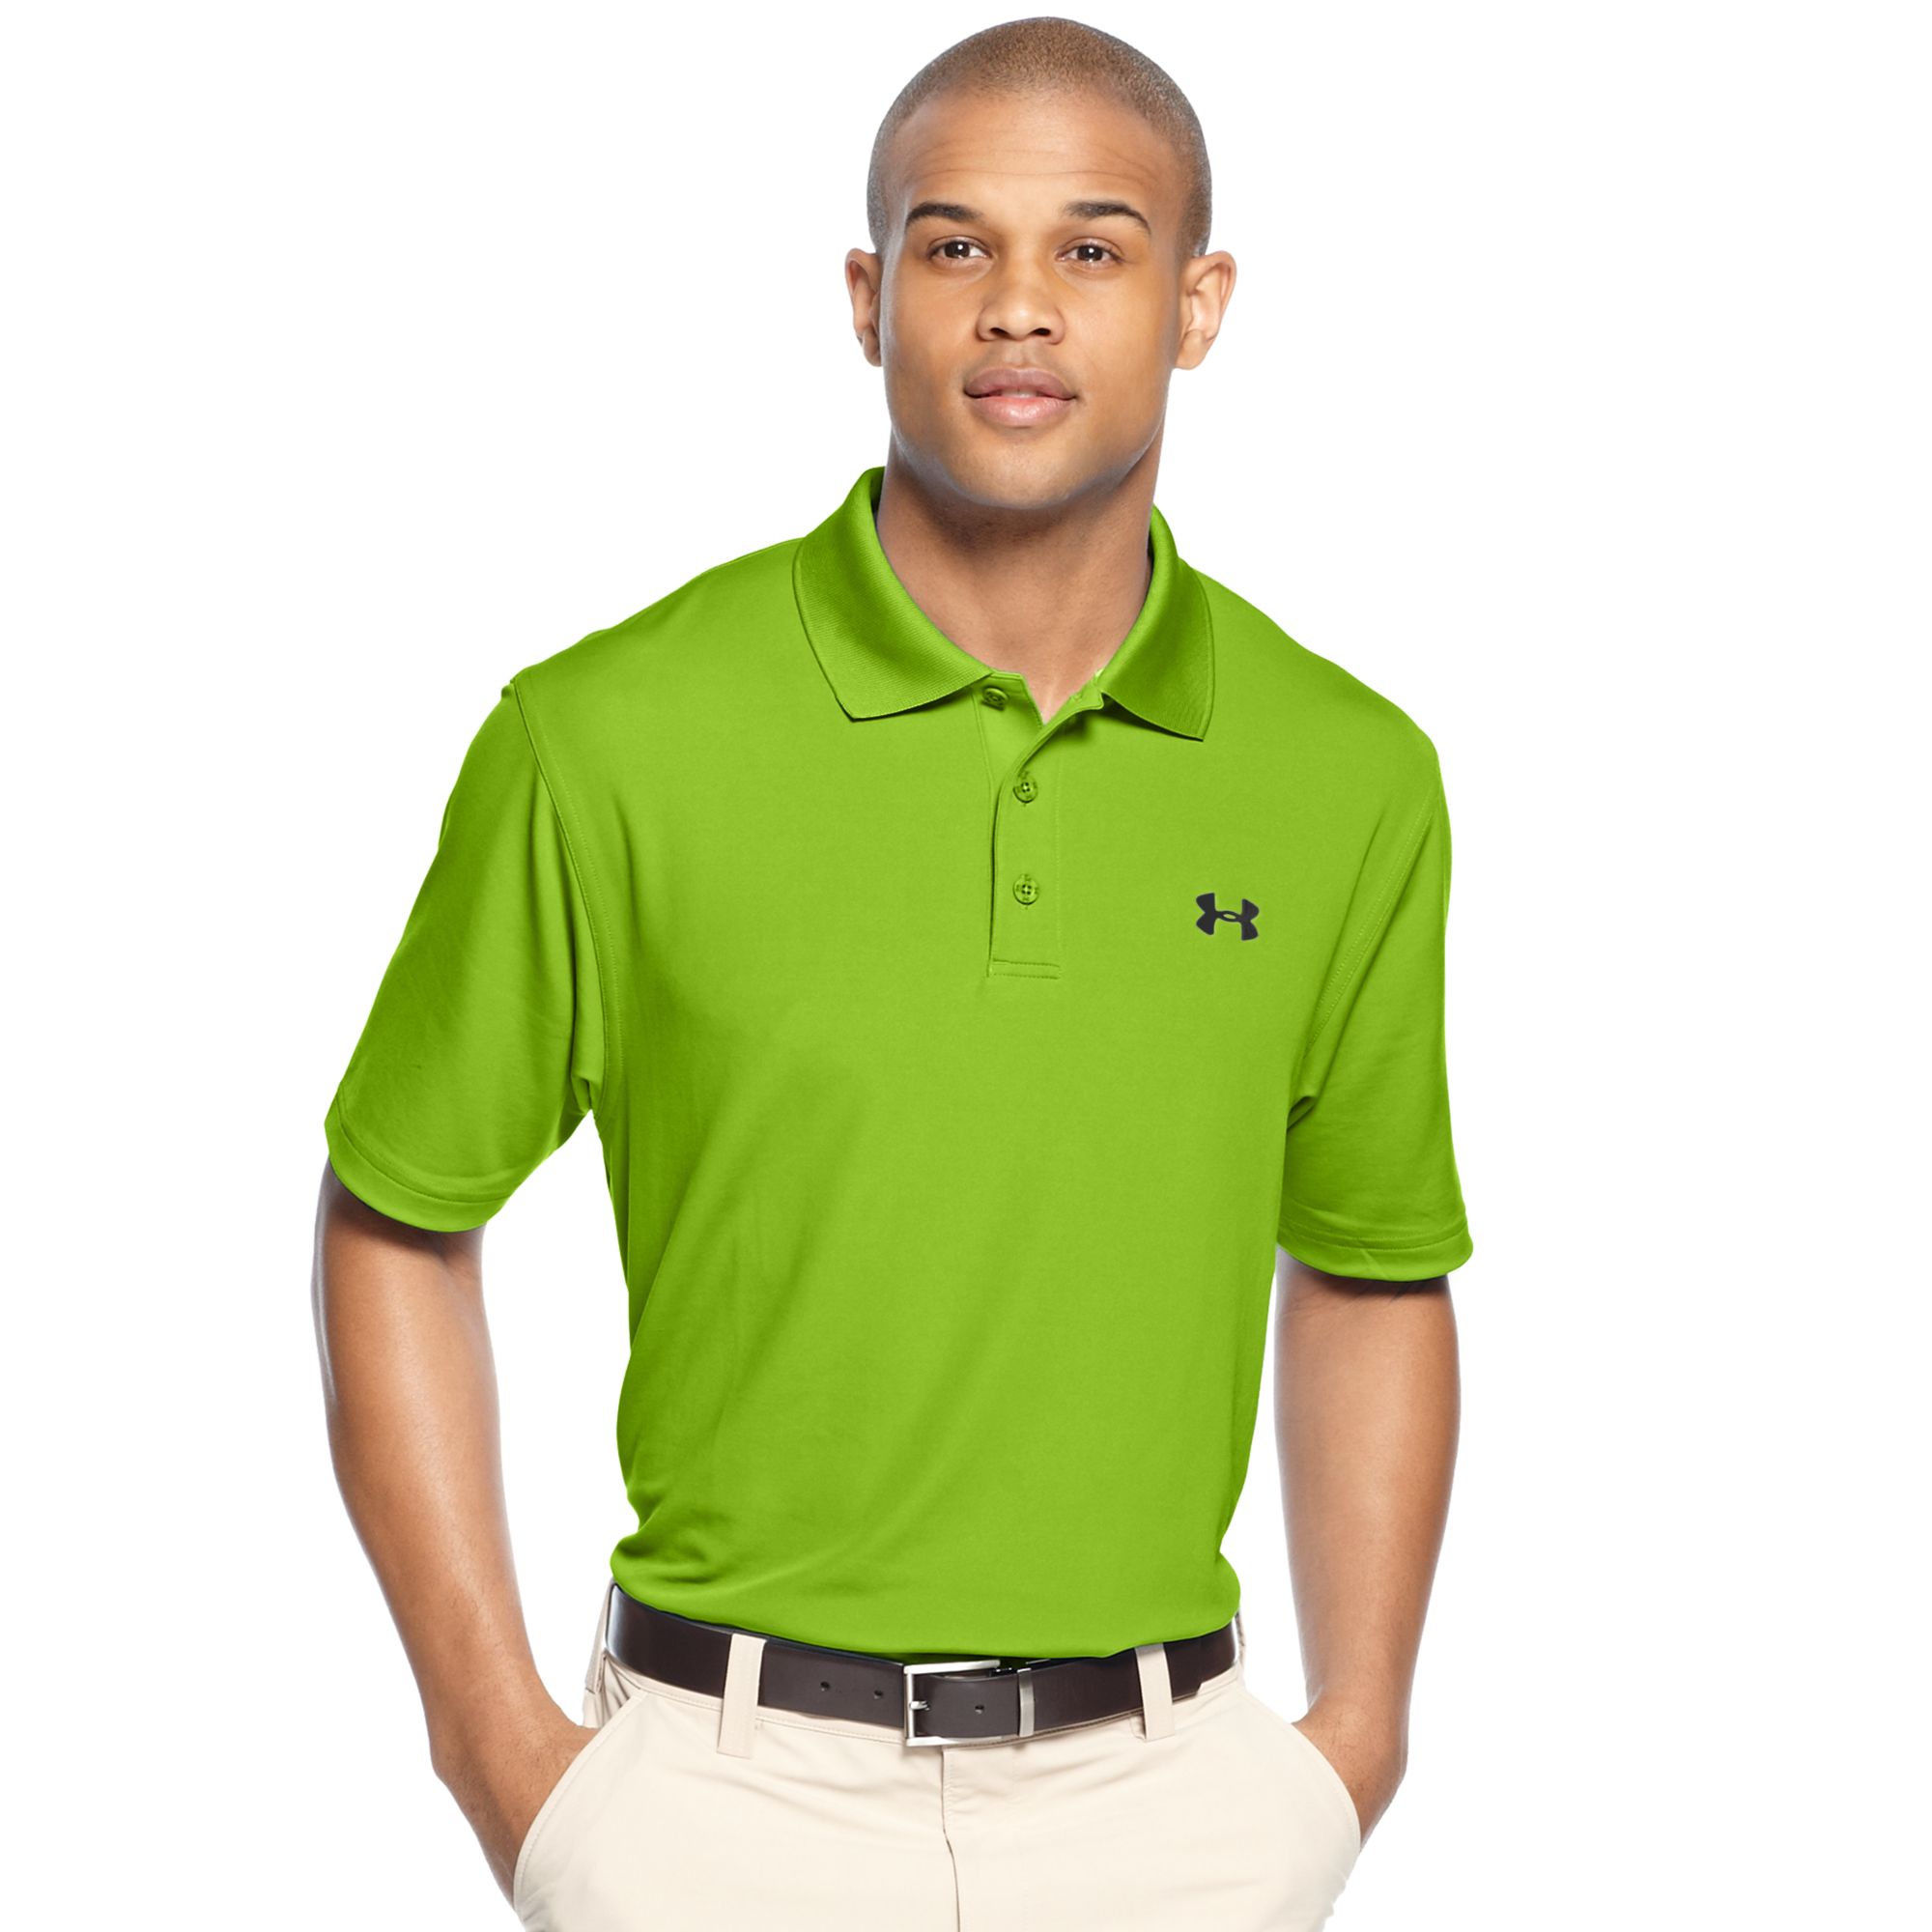 Under Armour Ua Performance Polo in Green for Men - Lyst